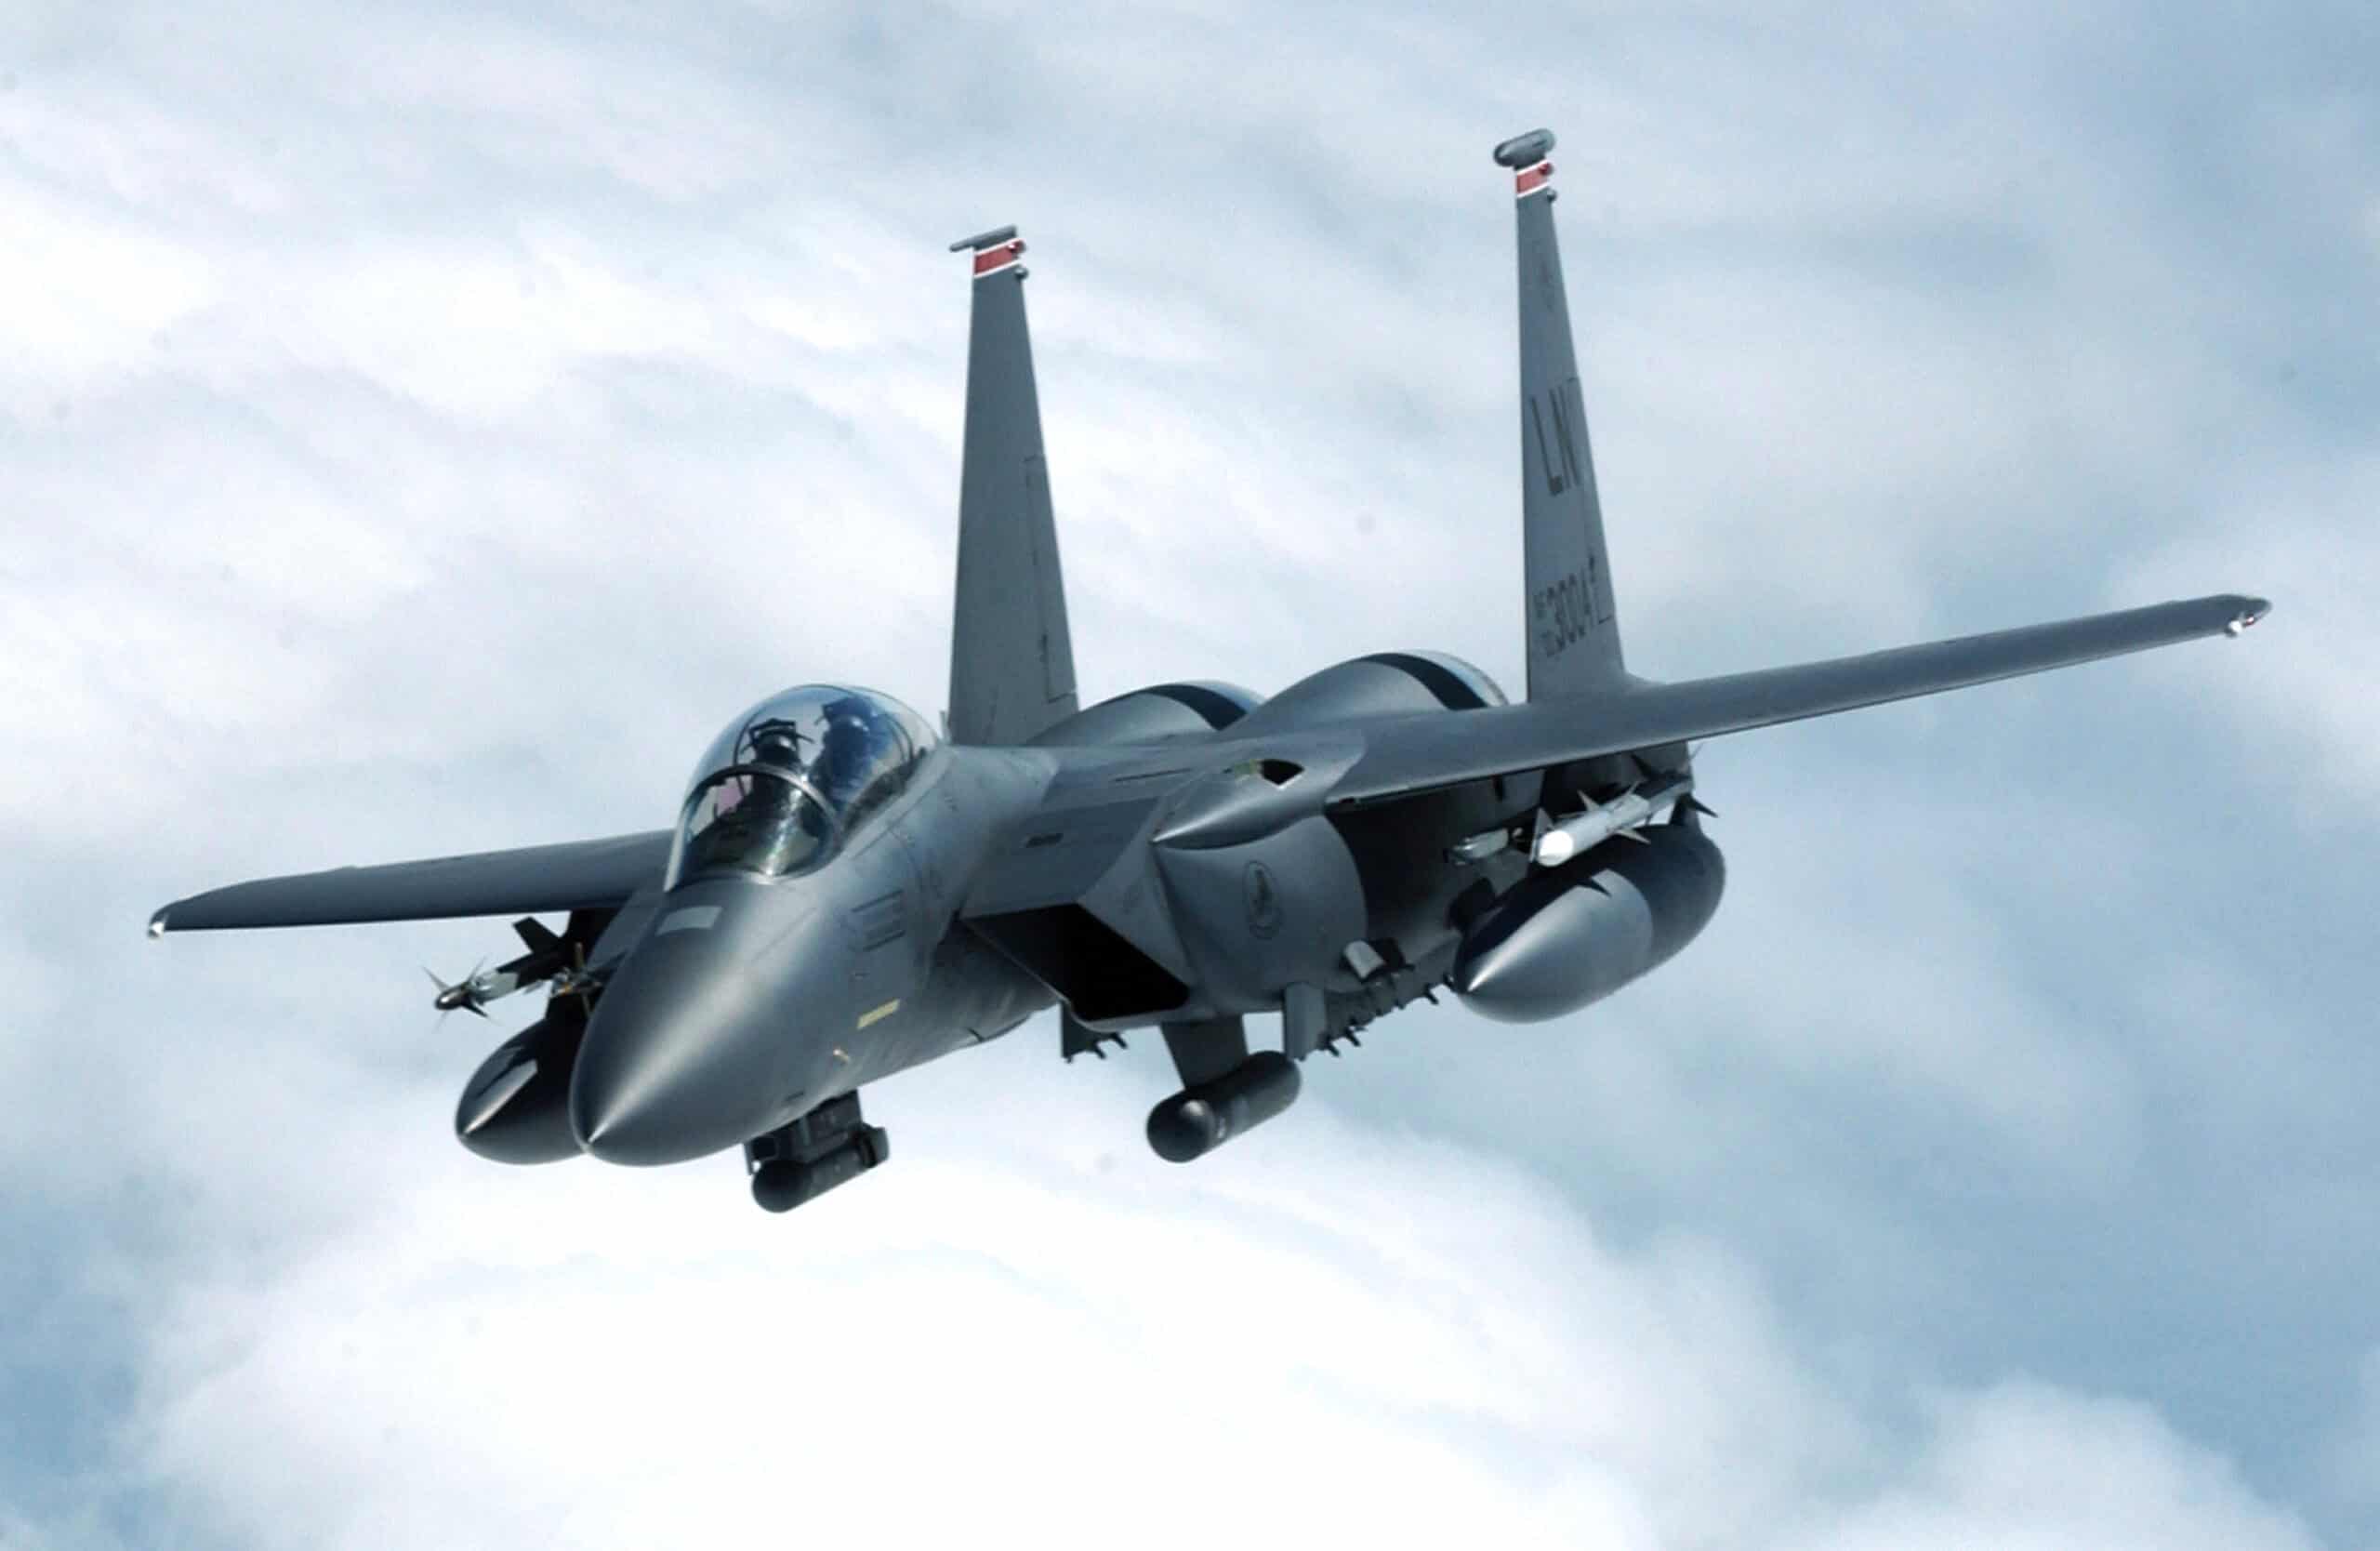 File:F-15E Strike Eagle banks away from a tanker.jpg by (U.S. Air Force photo by Staff Sgt. Tony R. Tolley)